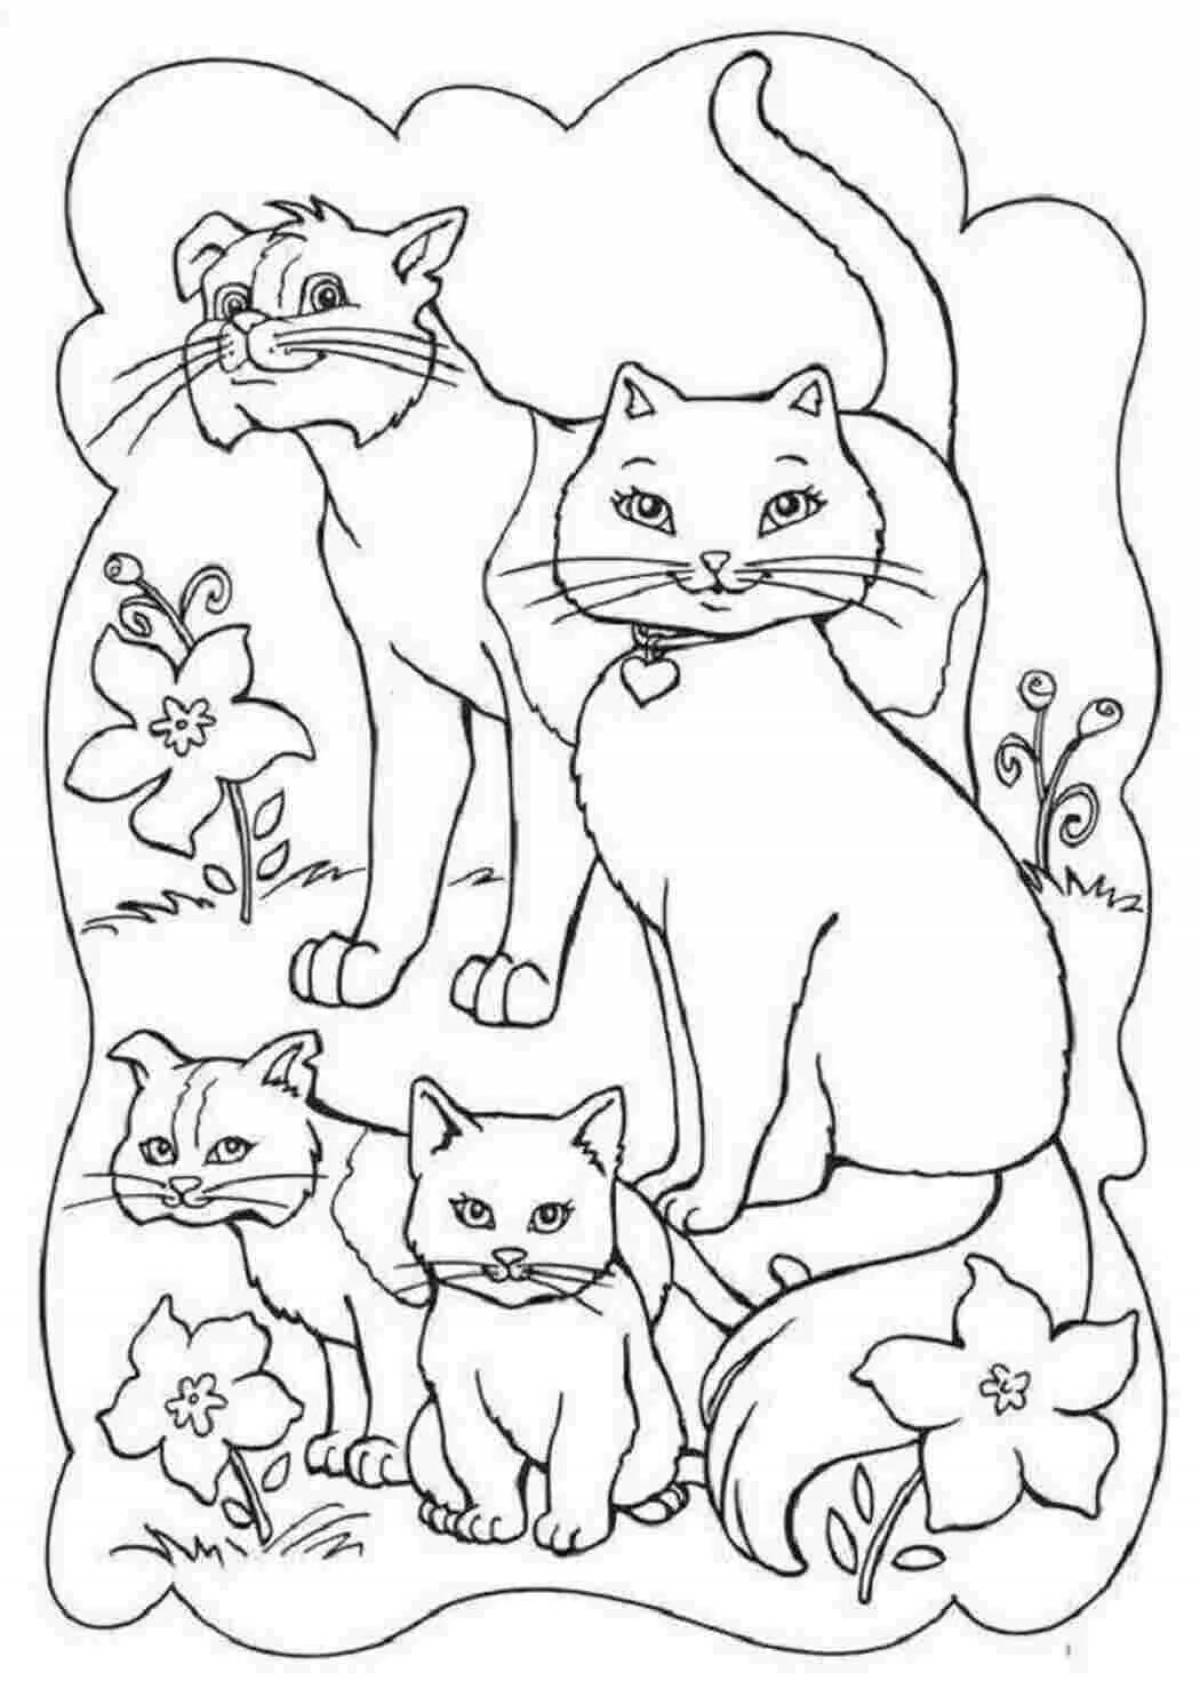 Coloring sweet moment cat family